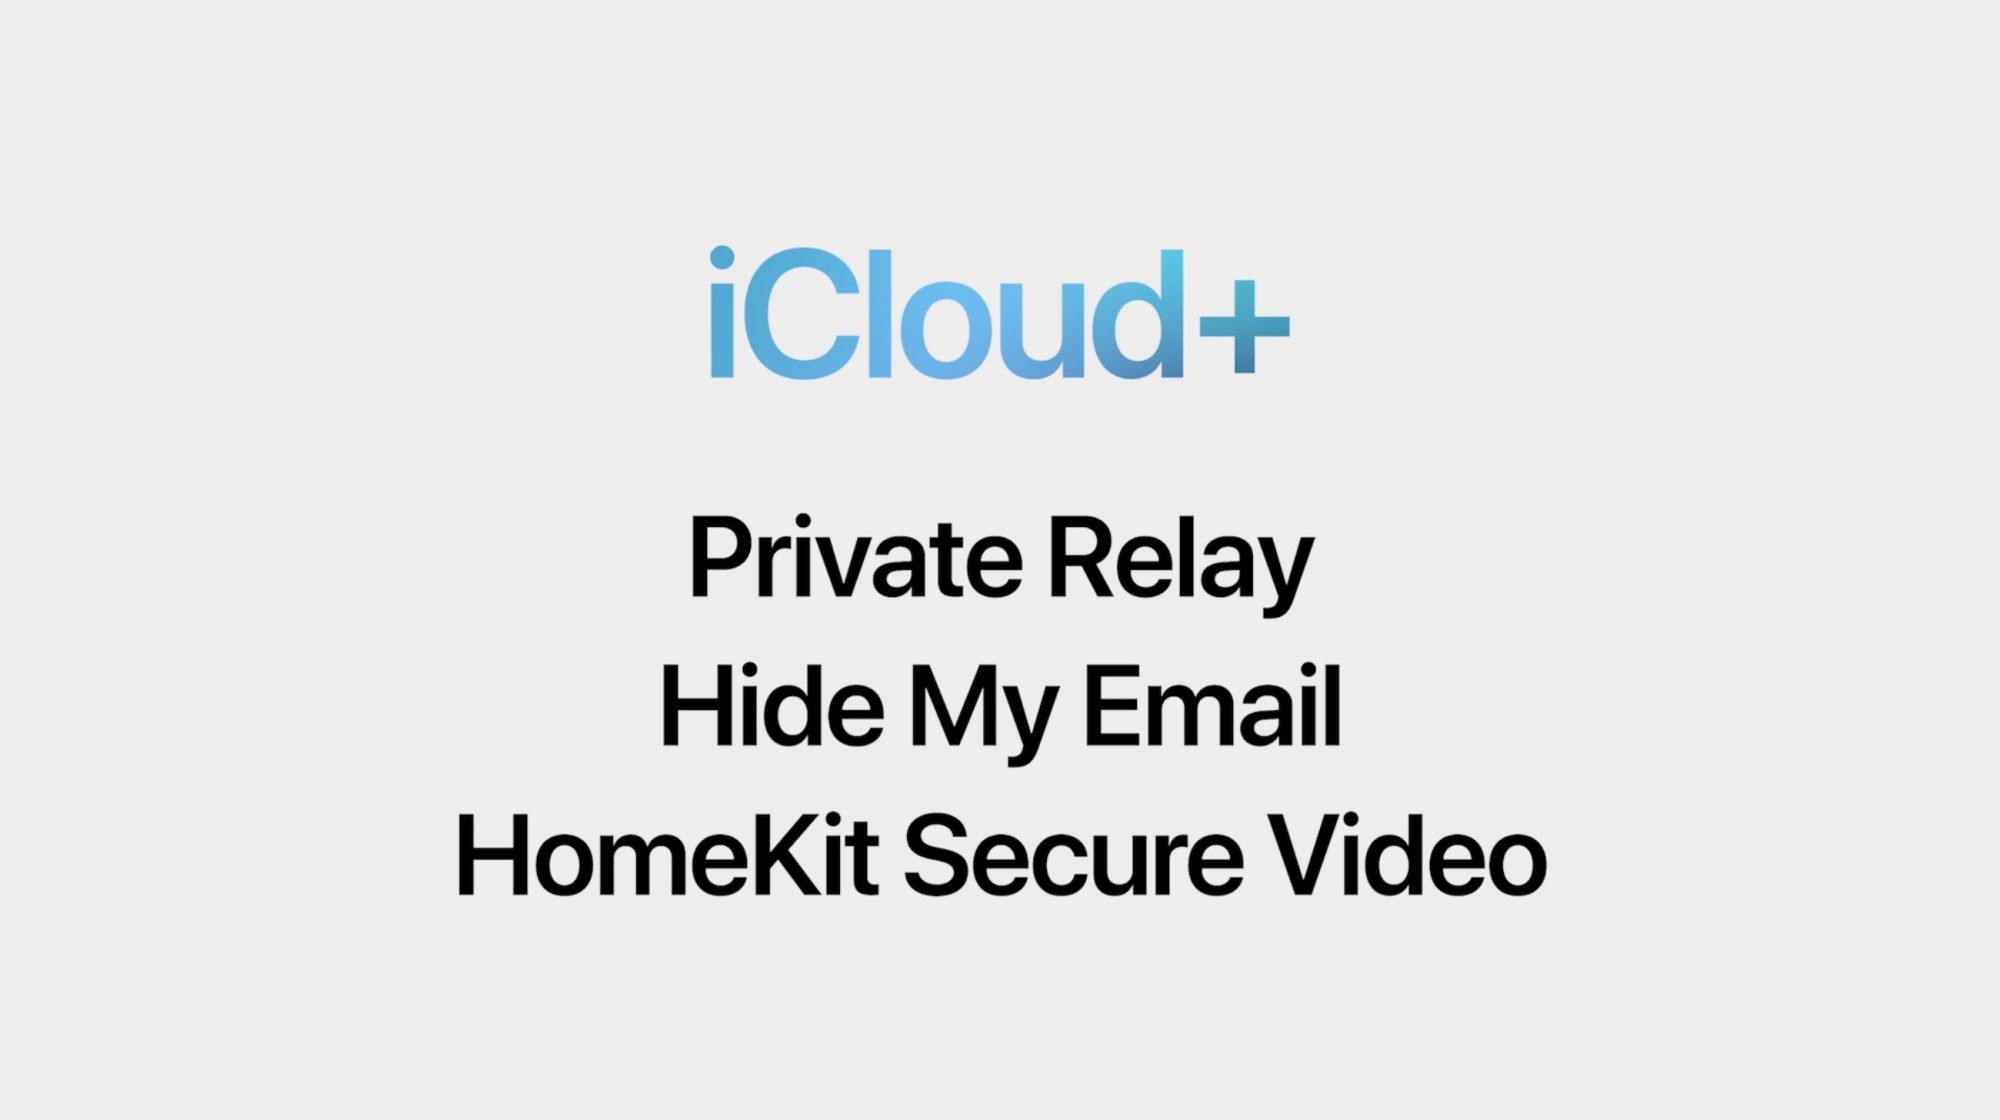 iCloud Plus offers private relay, hide my email, and updates to HomeKit video